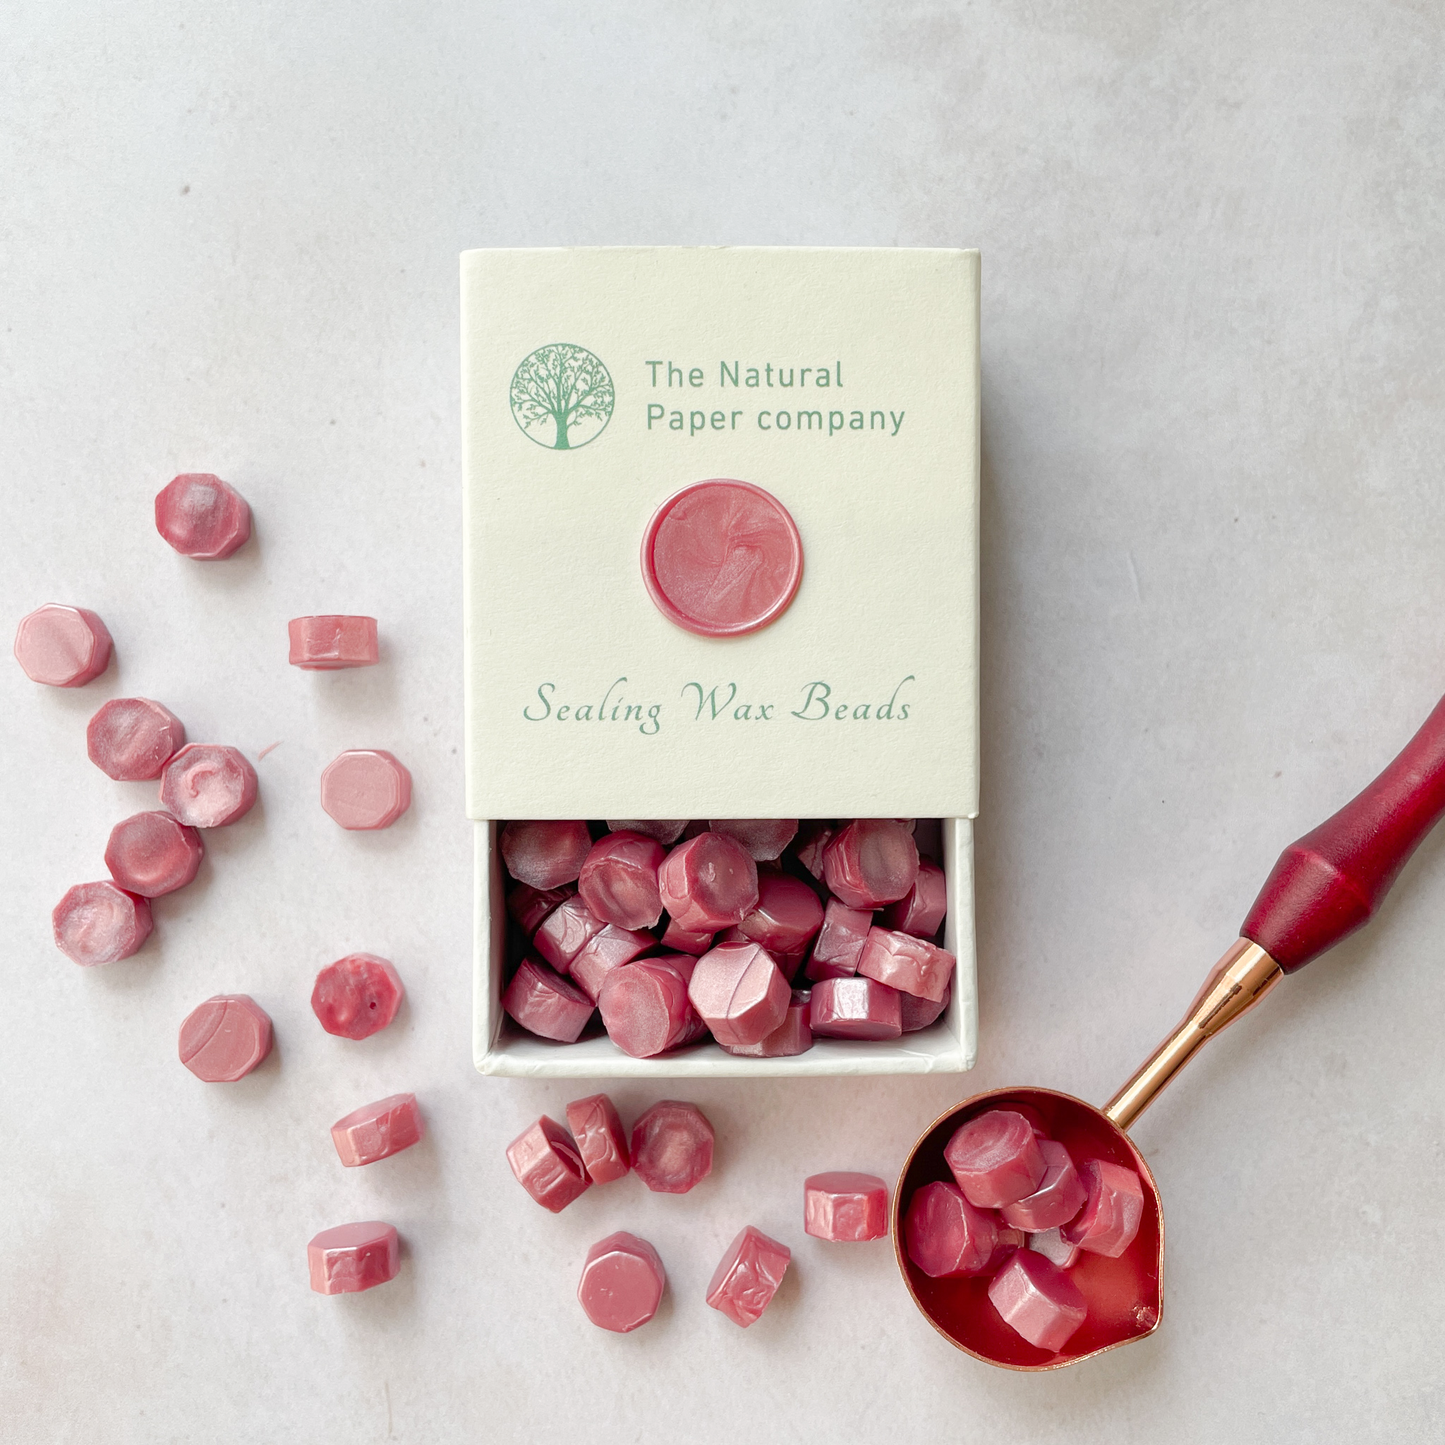 box of eco friendly wax seals in dusky pink colour.  Wax for making wax seals and stamps